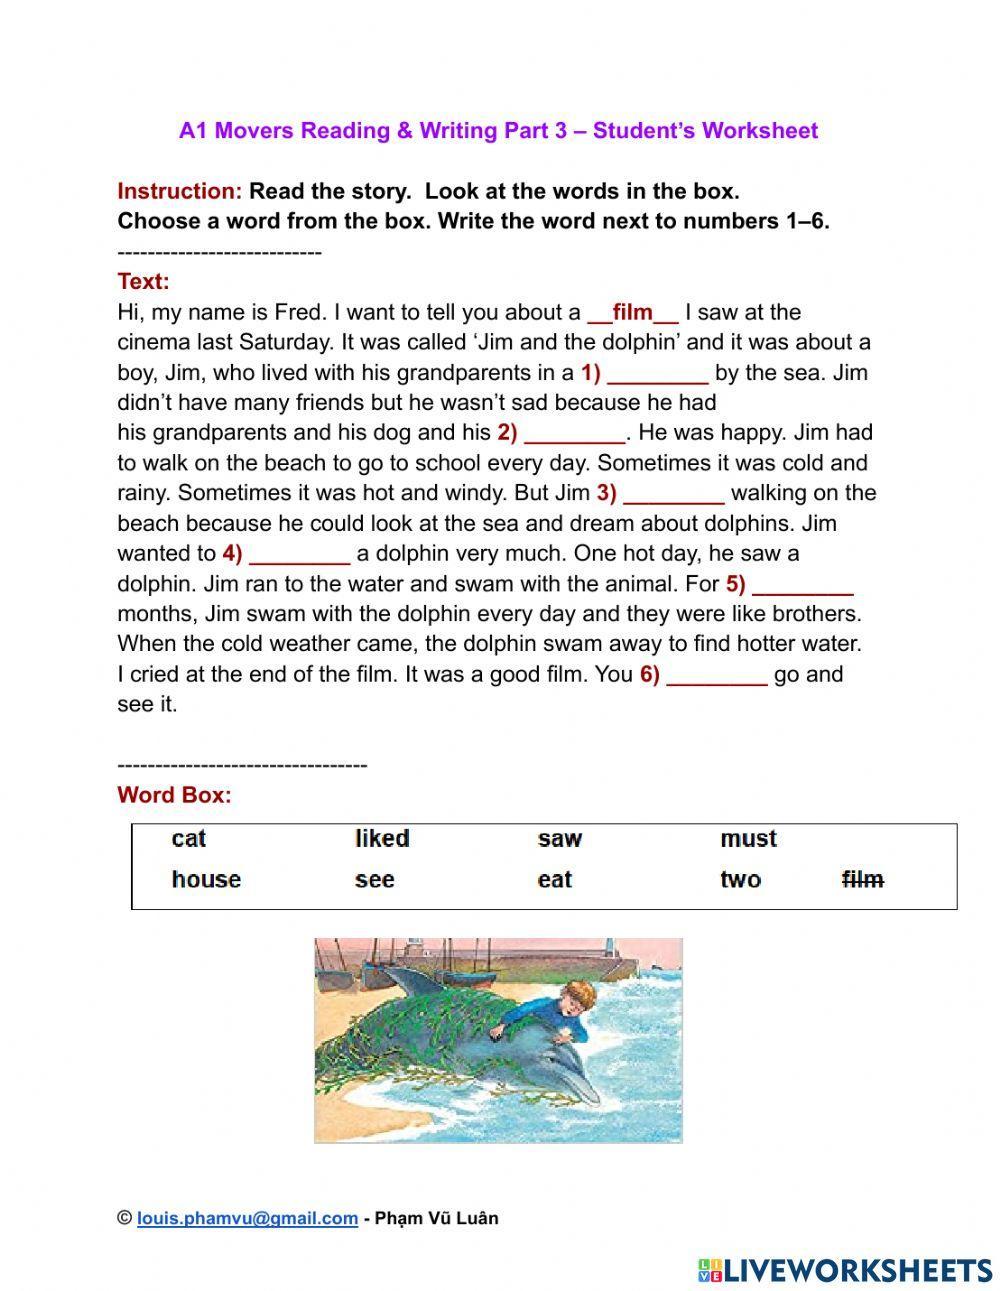 A1 Movers Reading & Writing Part 3 – Student’s Worksheet